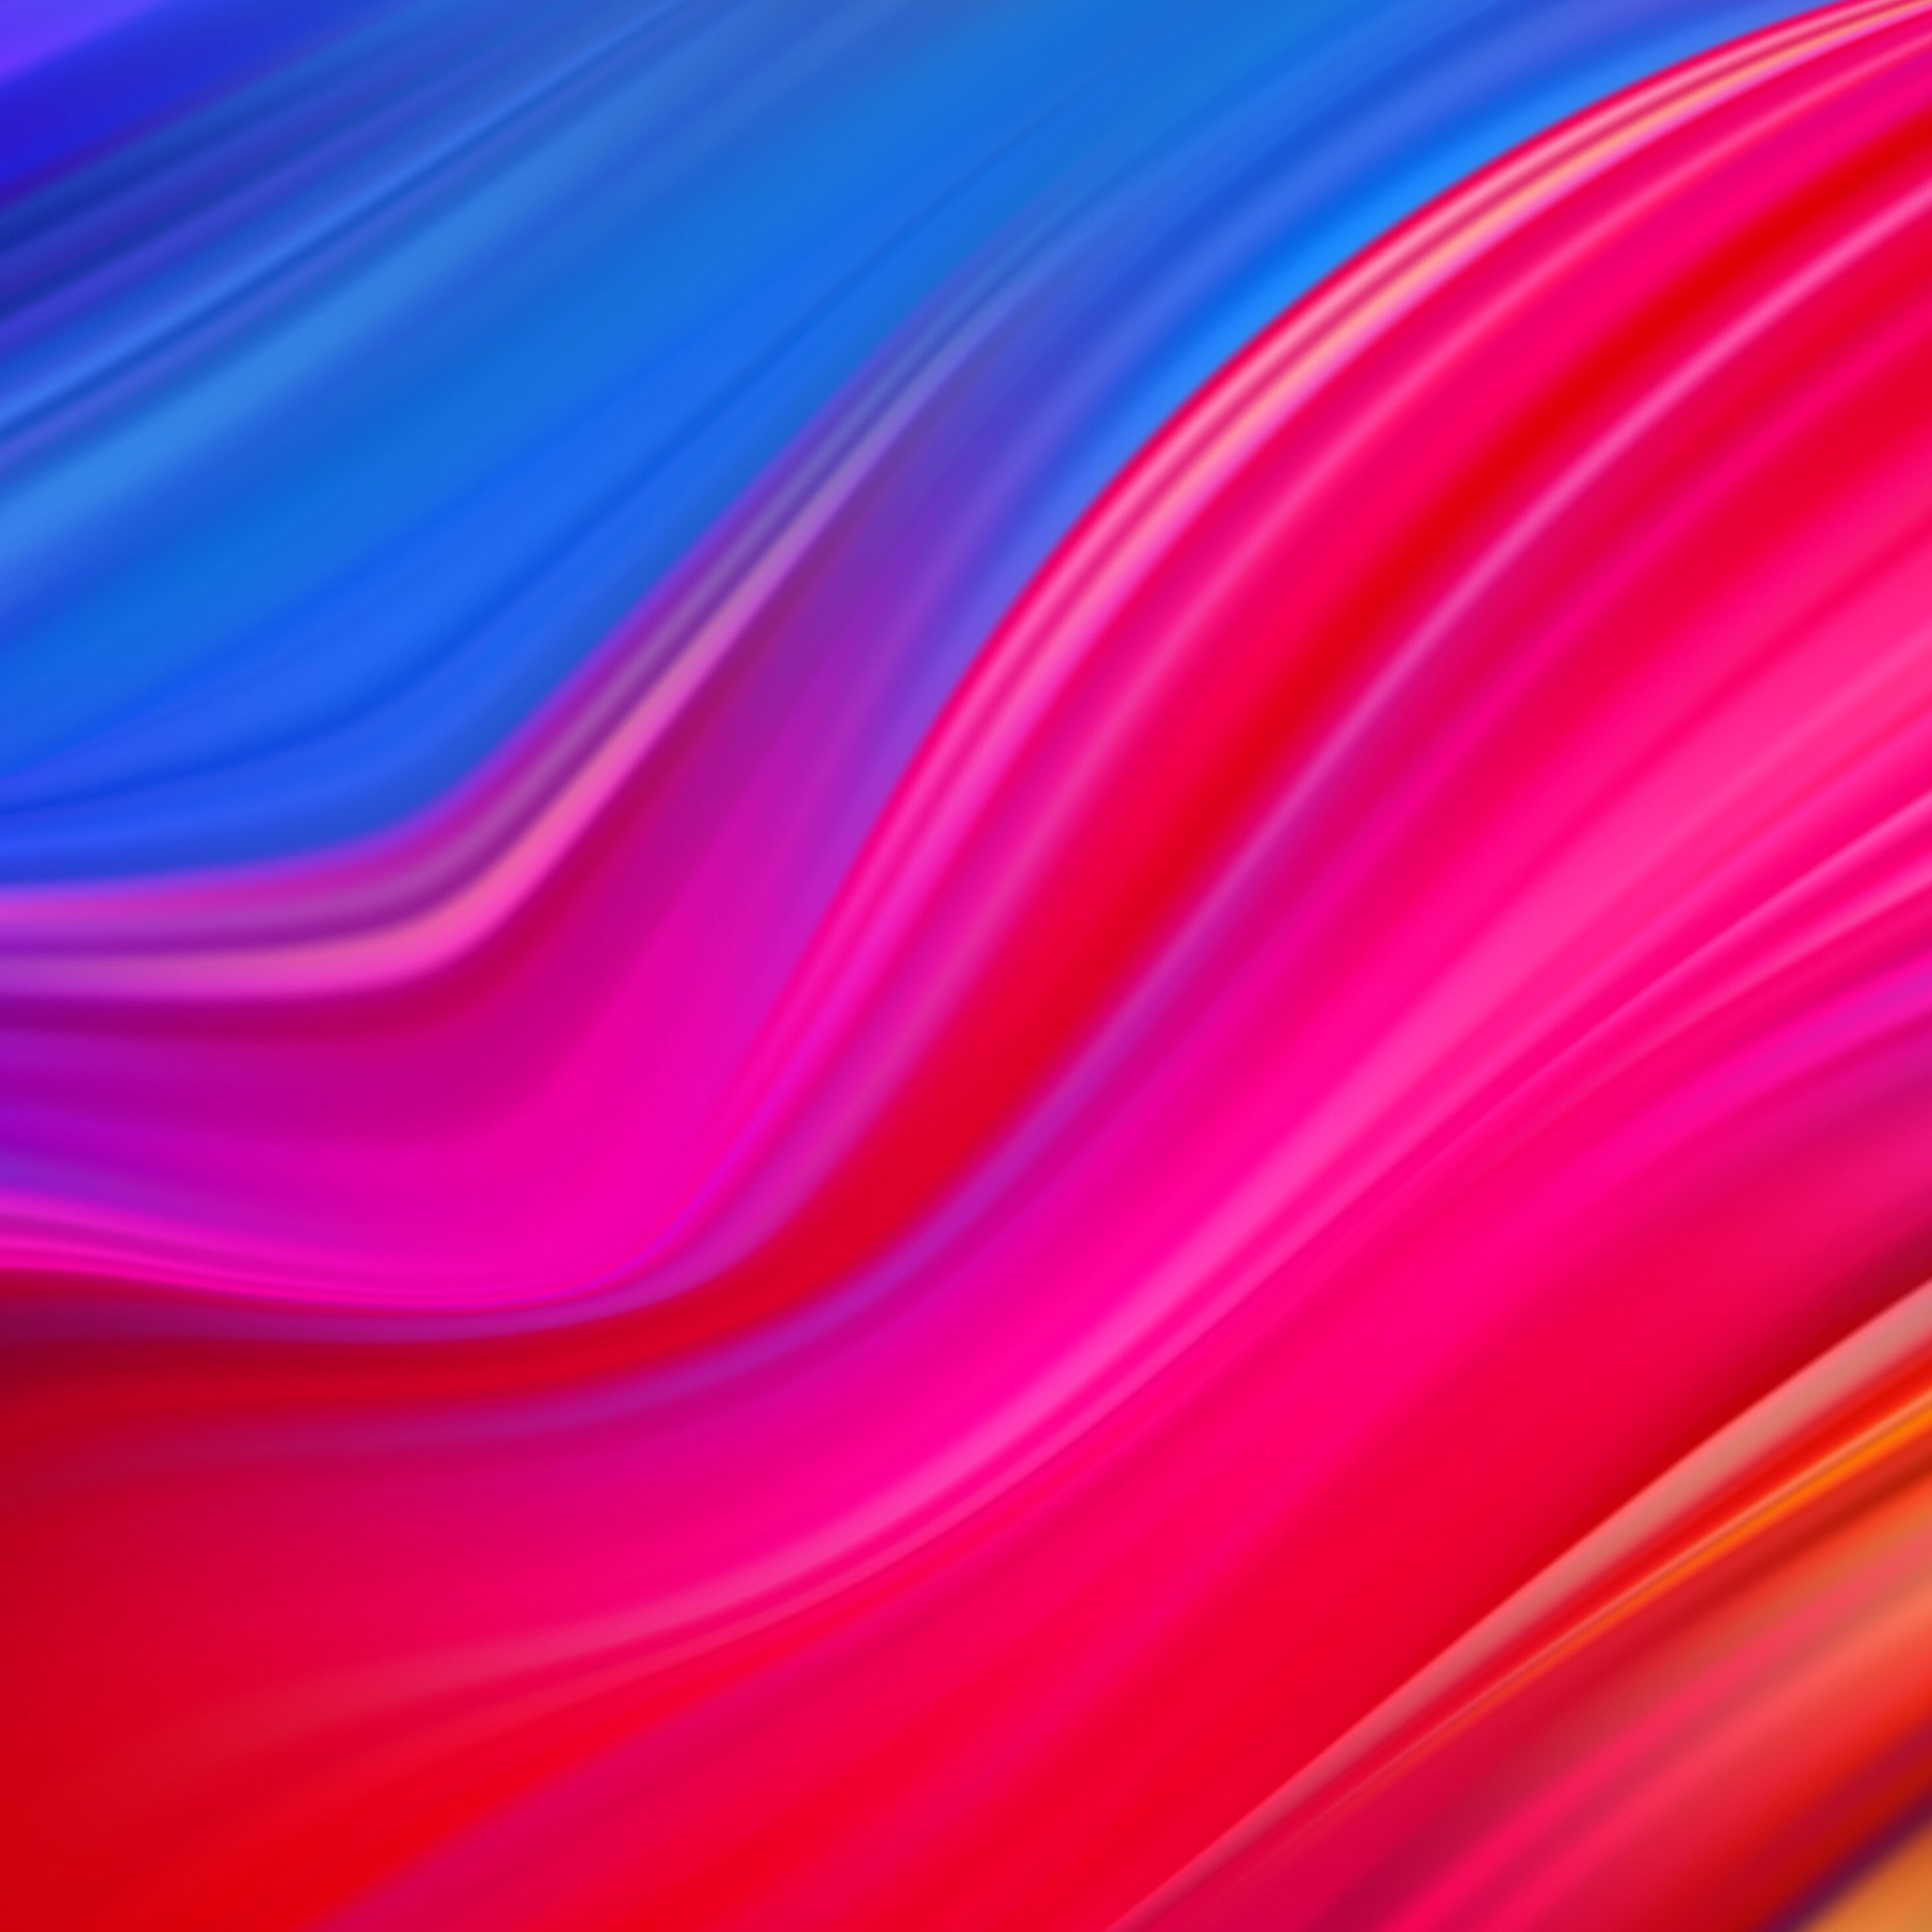 8k Abstract Colorful iPad Pro Retina Display HD 4k Wallpaper, Image, Background, Photo and Picture